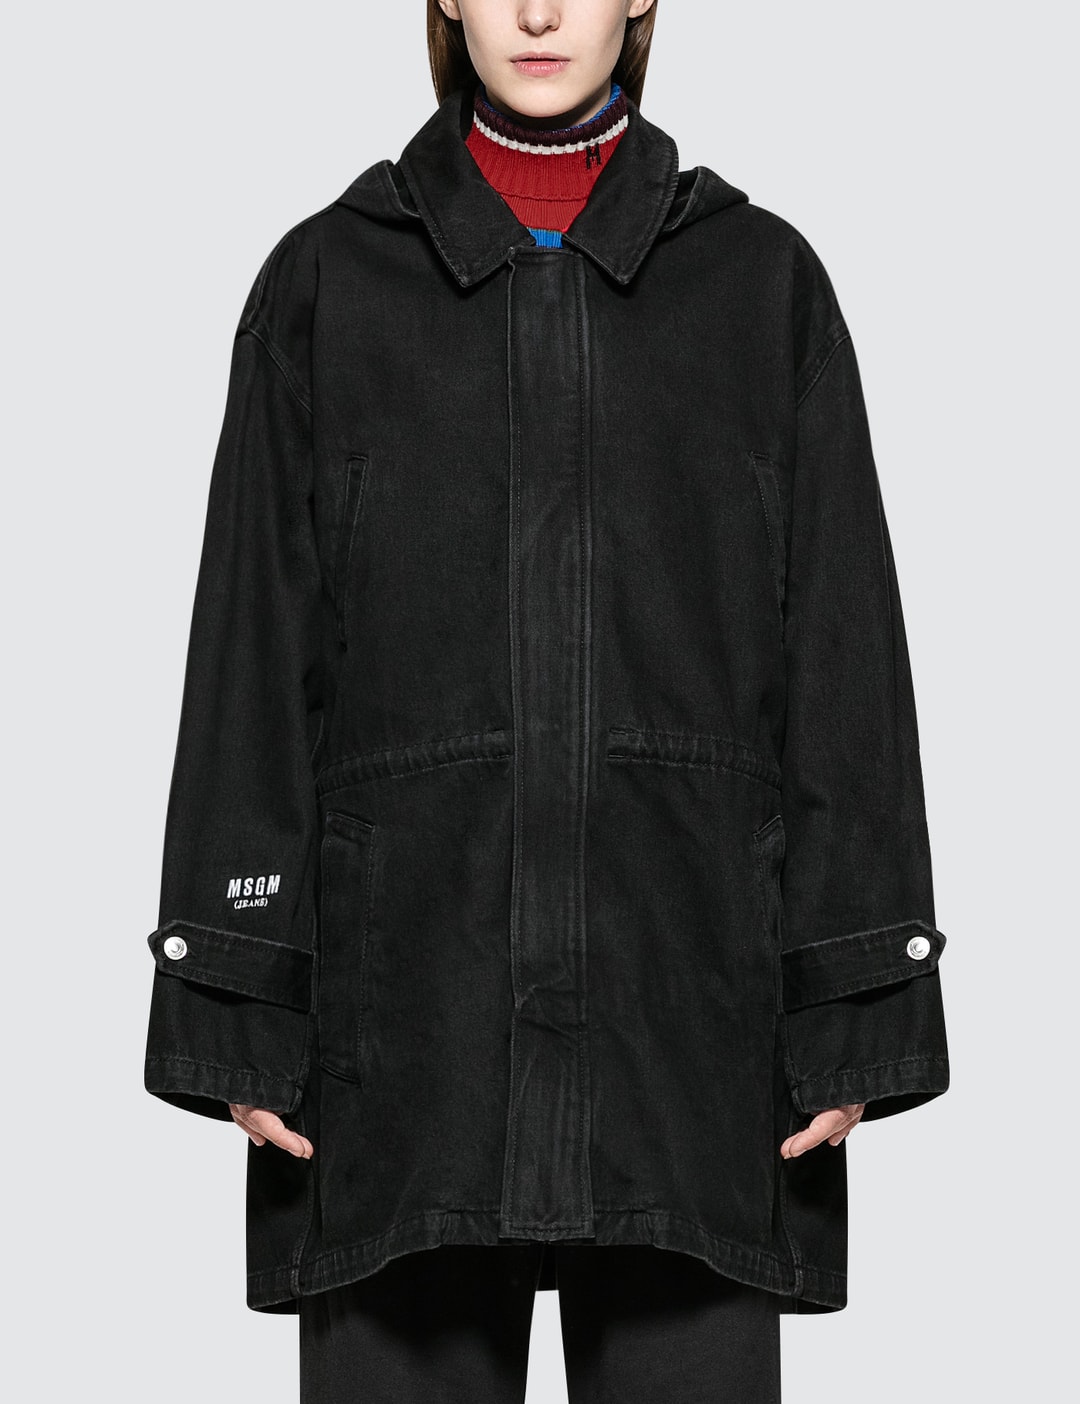 MSGM - Denim Parka Jacket | HBX - Globally Curated Fashion and ...